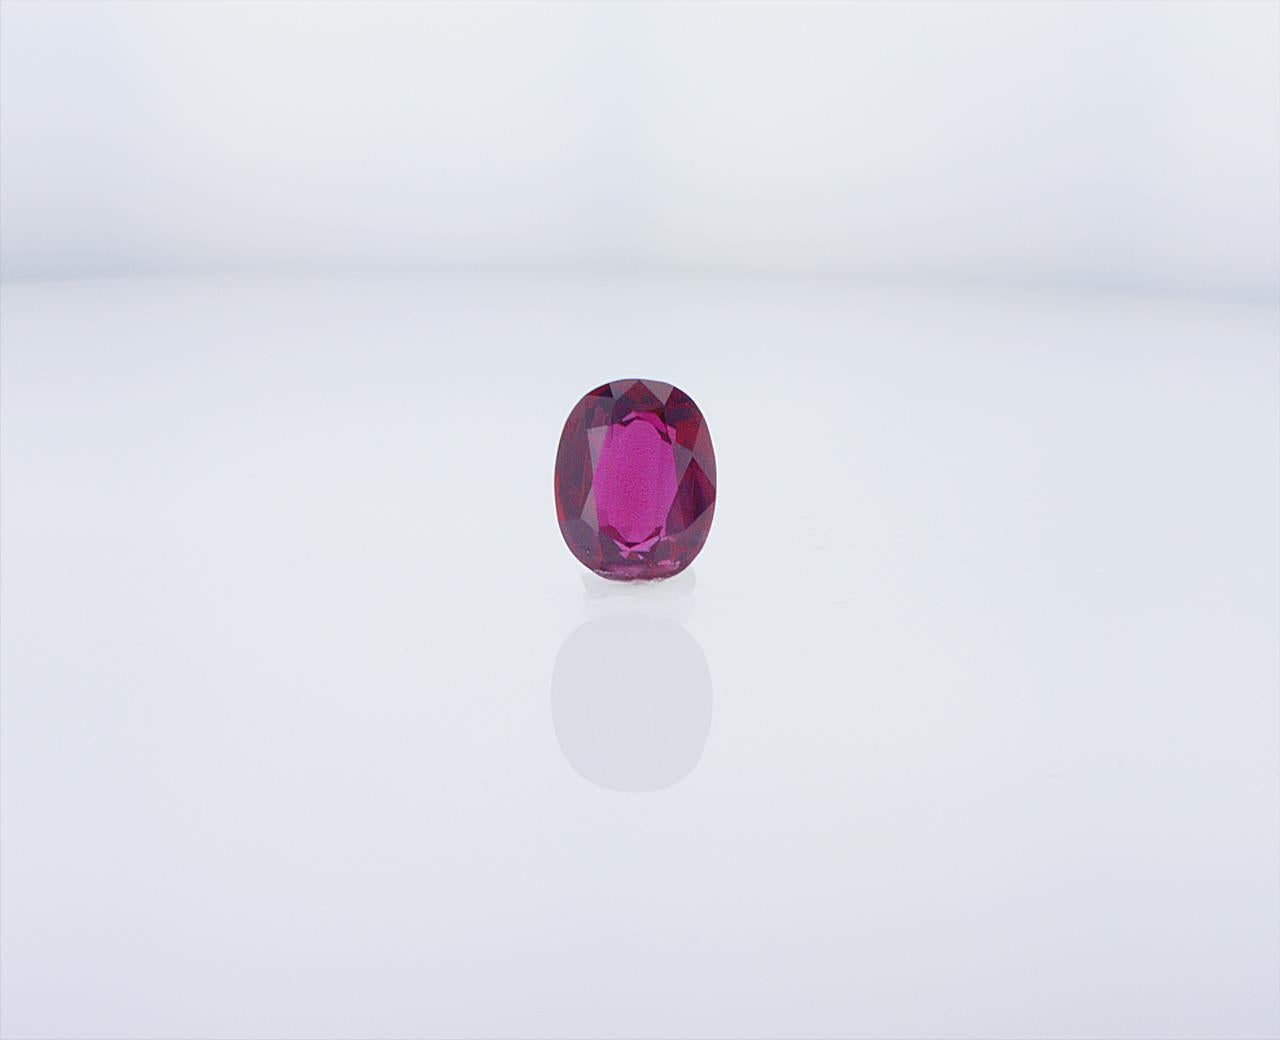 3.89 Carat Thai Oval Ruby, GIA Report 6173102771. 10.97 x 8.75 x 4.19mm. Natural, heated, red. 